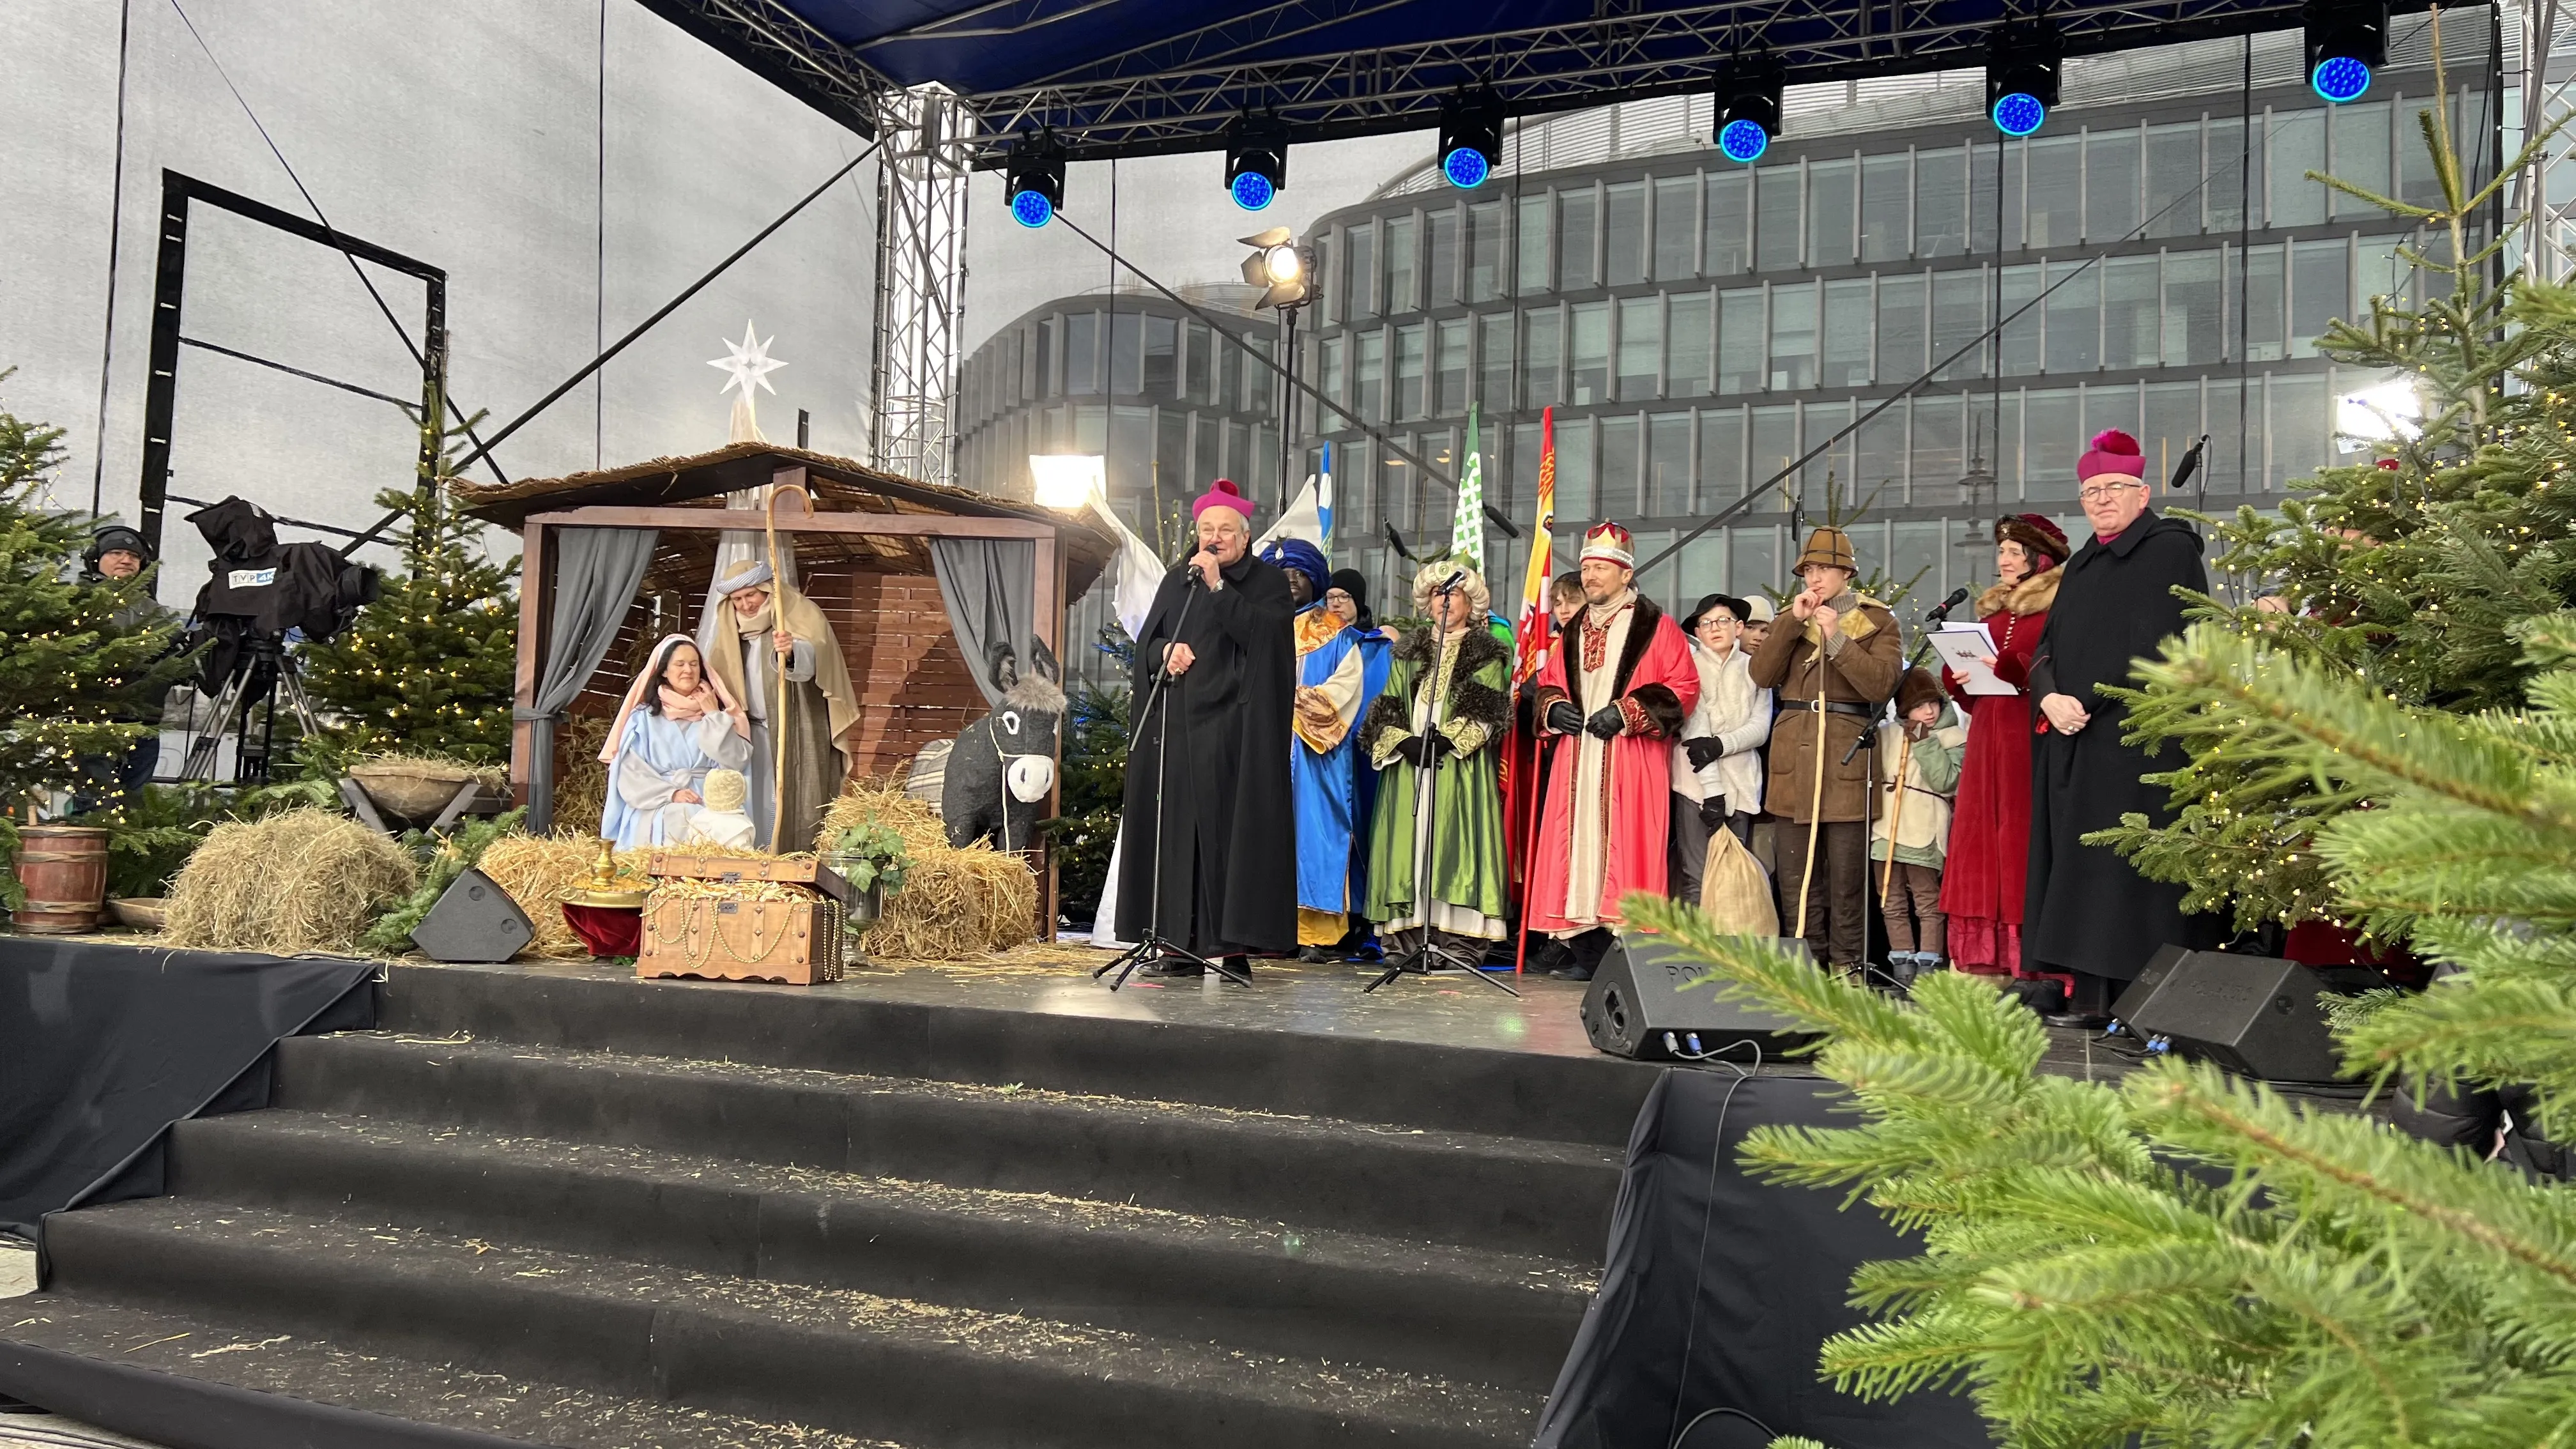 Three Kings parades went down the streets of 800 Polish towns and cities Jan. 6, 2023, for the feast of the Epiphany, with estimates of some 1.5 million people taking part in what is believed to be the largest street Nativity pageant in the world. Justyna Galant/CNA